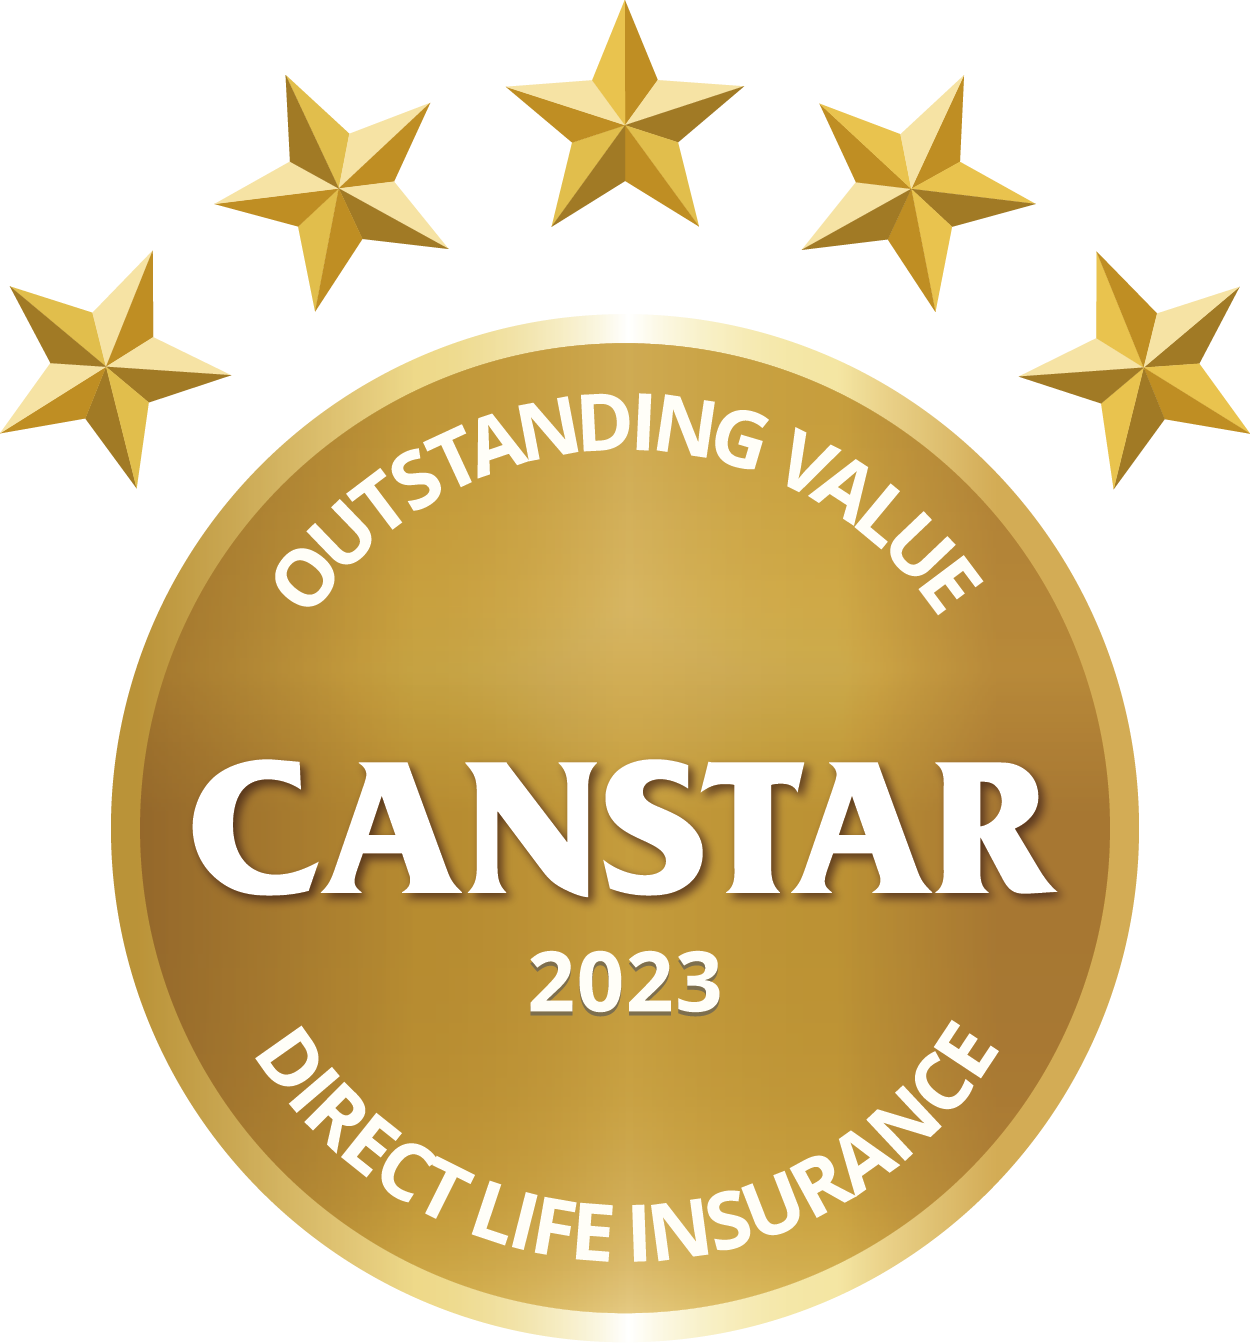 CANSTAR 2023 - Outstanding Value - Direct Life Insurance OL